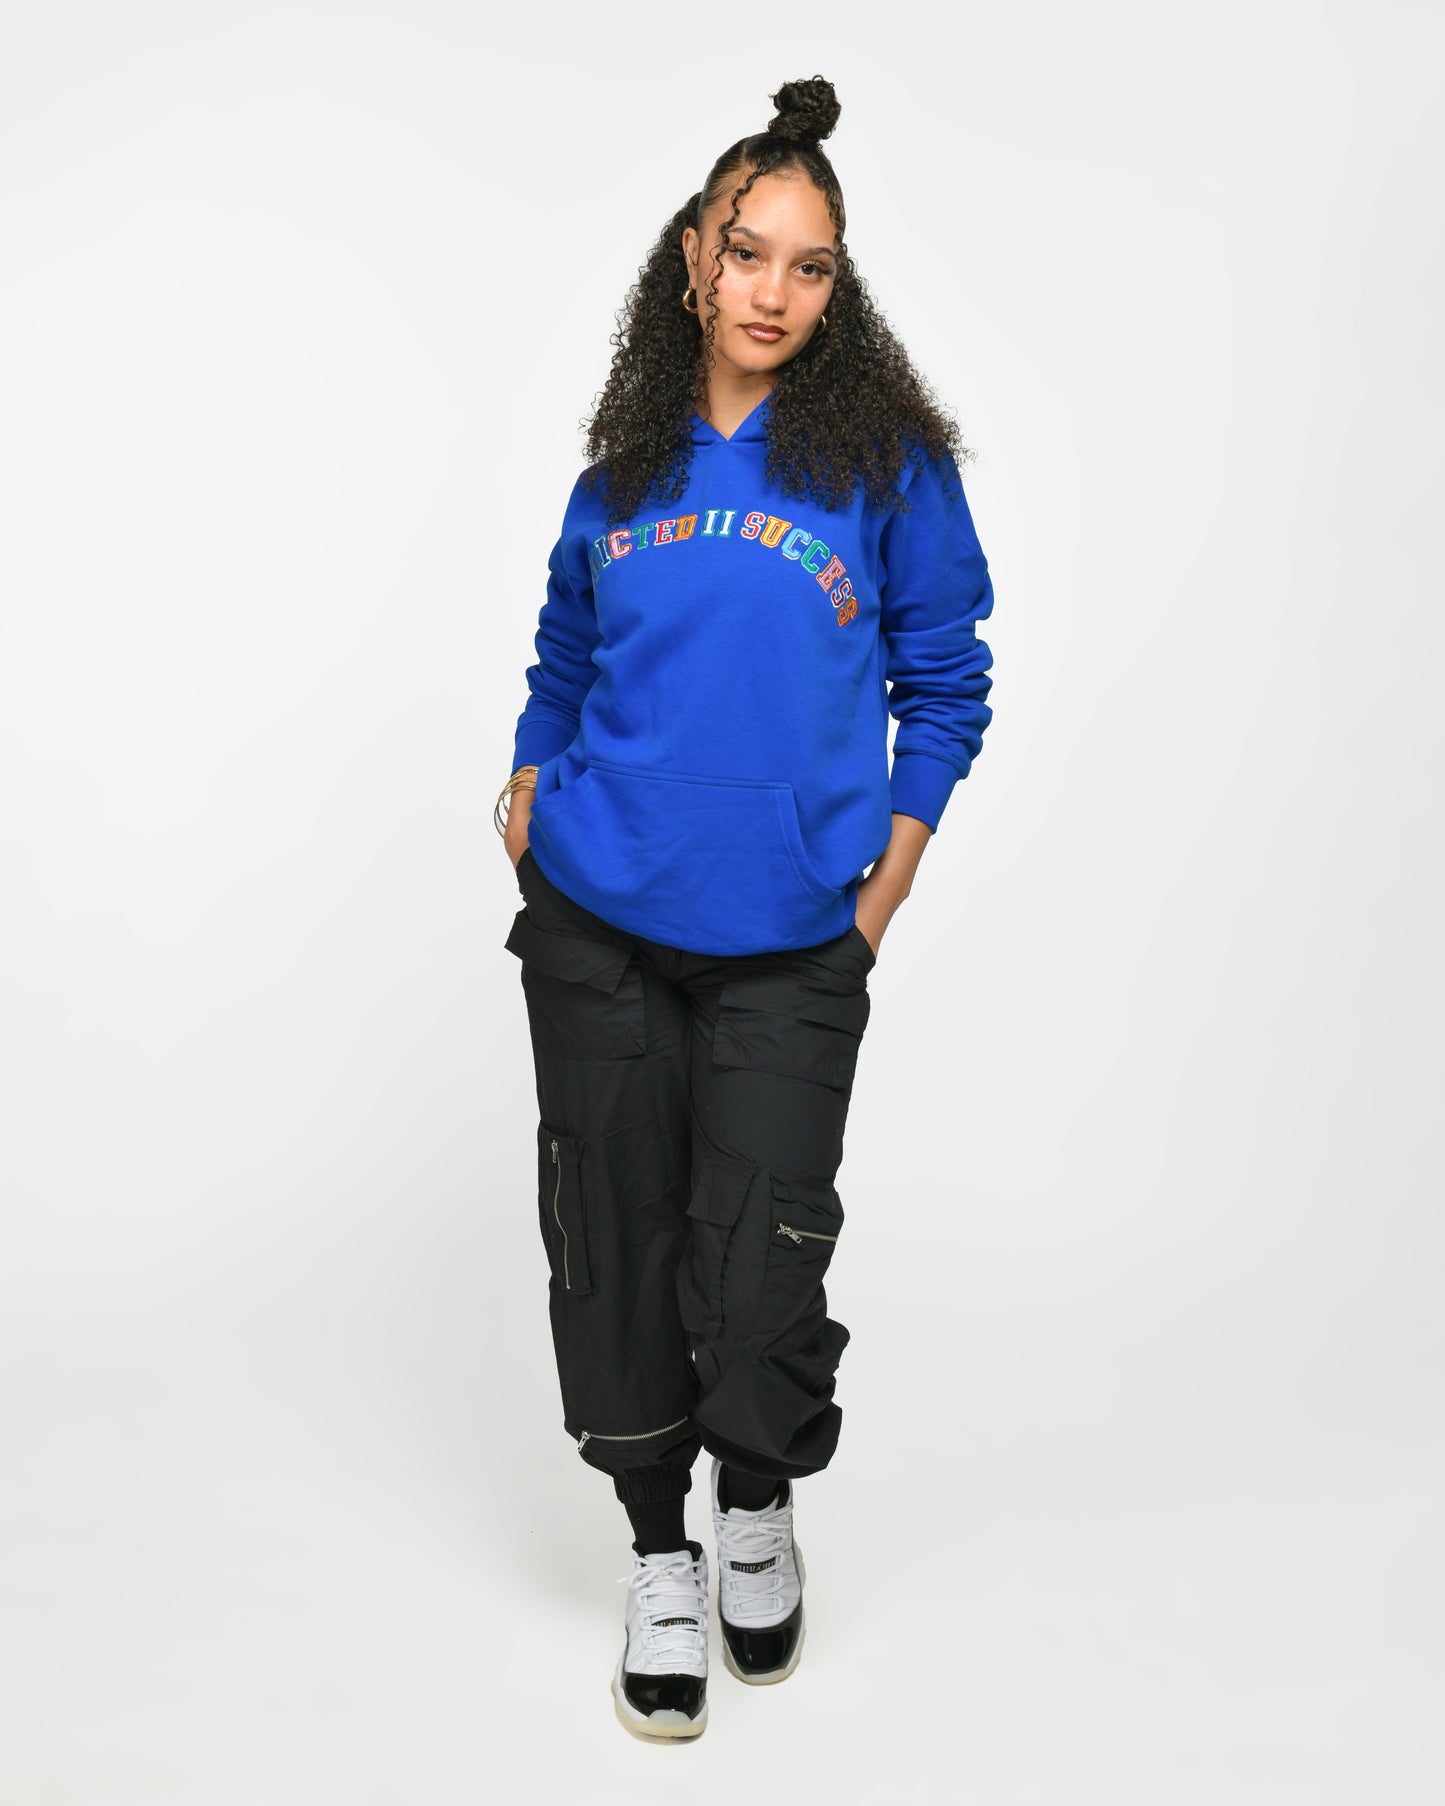 Royal Blue Multicolor Hoodie- (Don't Quit Your Almost There!) - Unisex